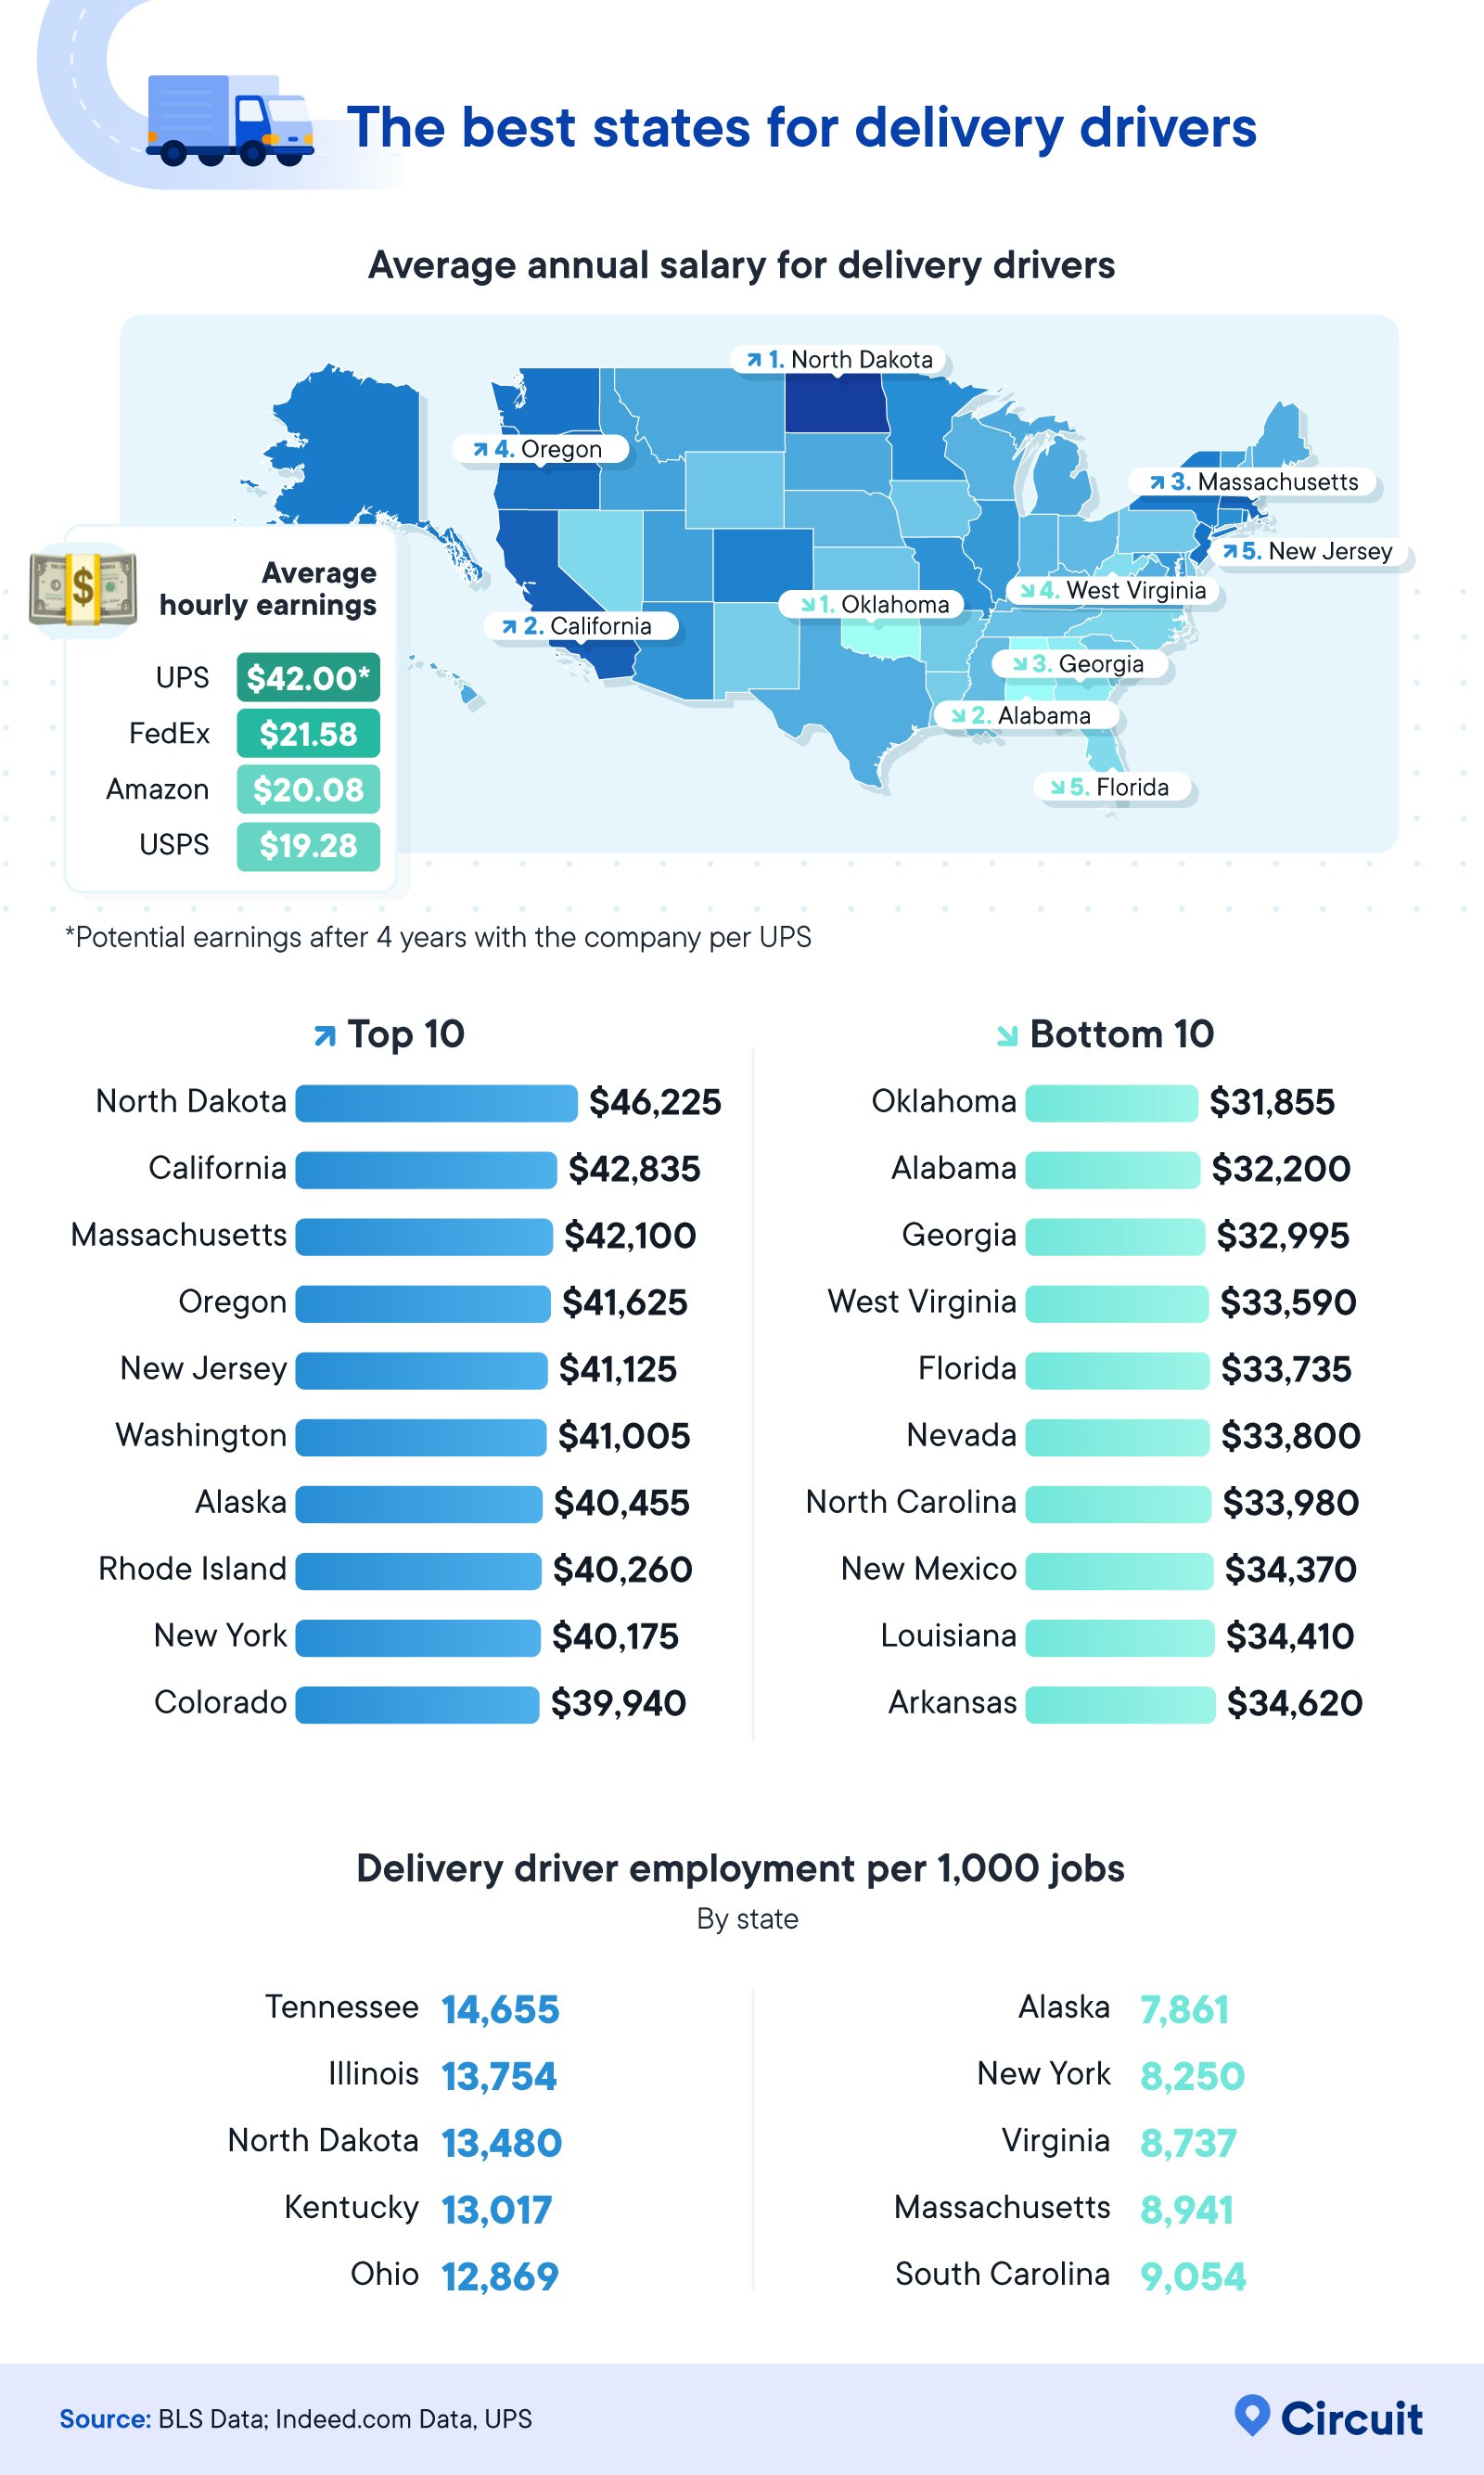 Infographic to analyze the best states for delivery drivers based on annual salaries and employment rates